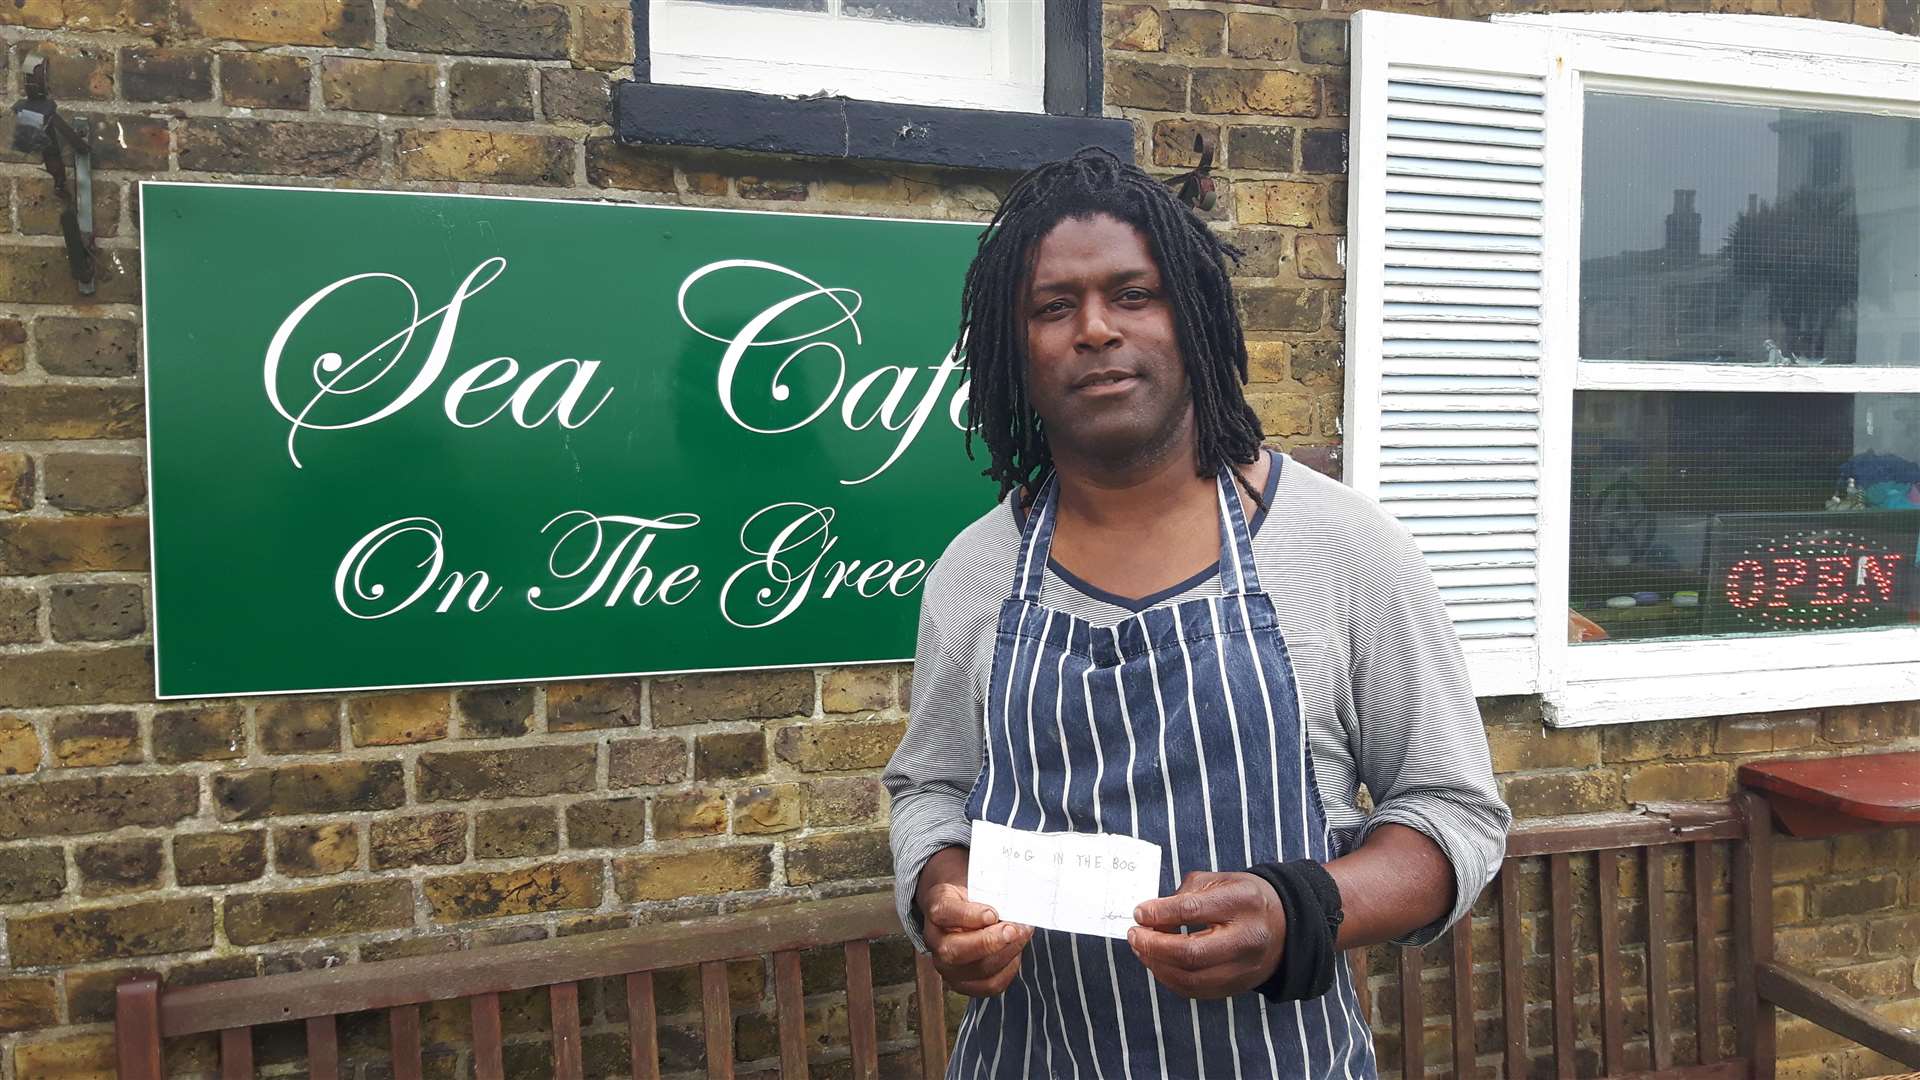 Café owner Peter St Ange spoke out about his campaign against racism yesterday